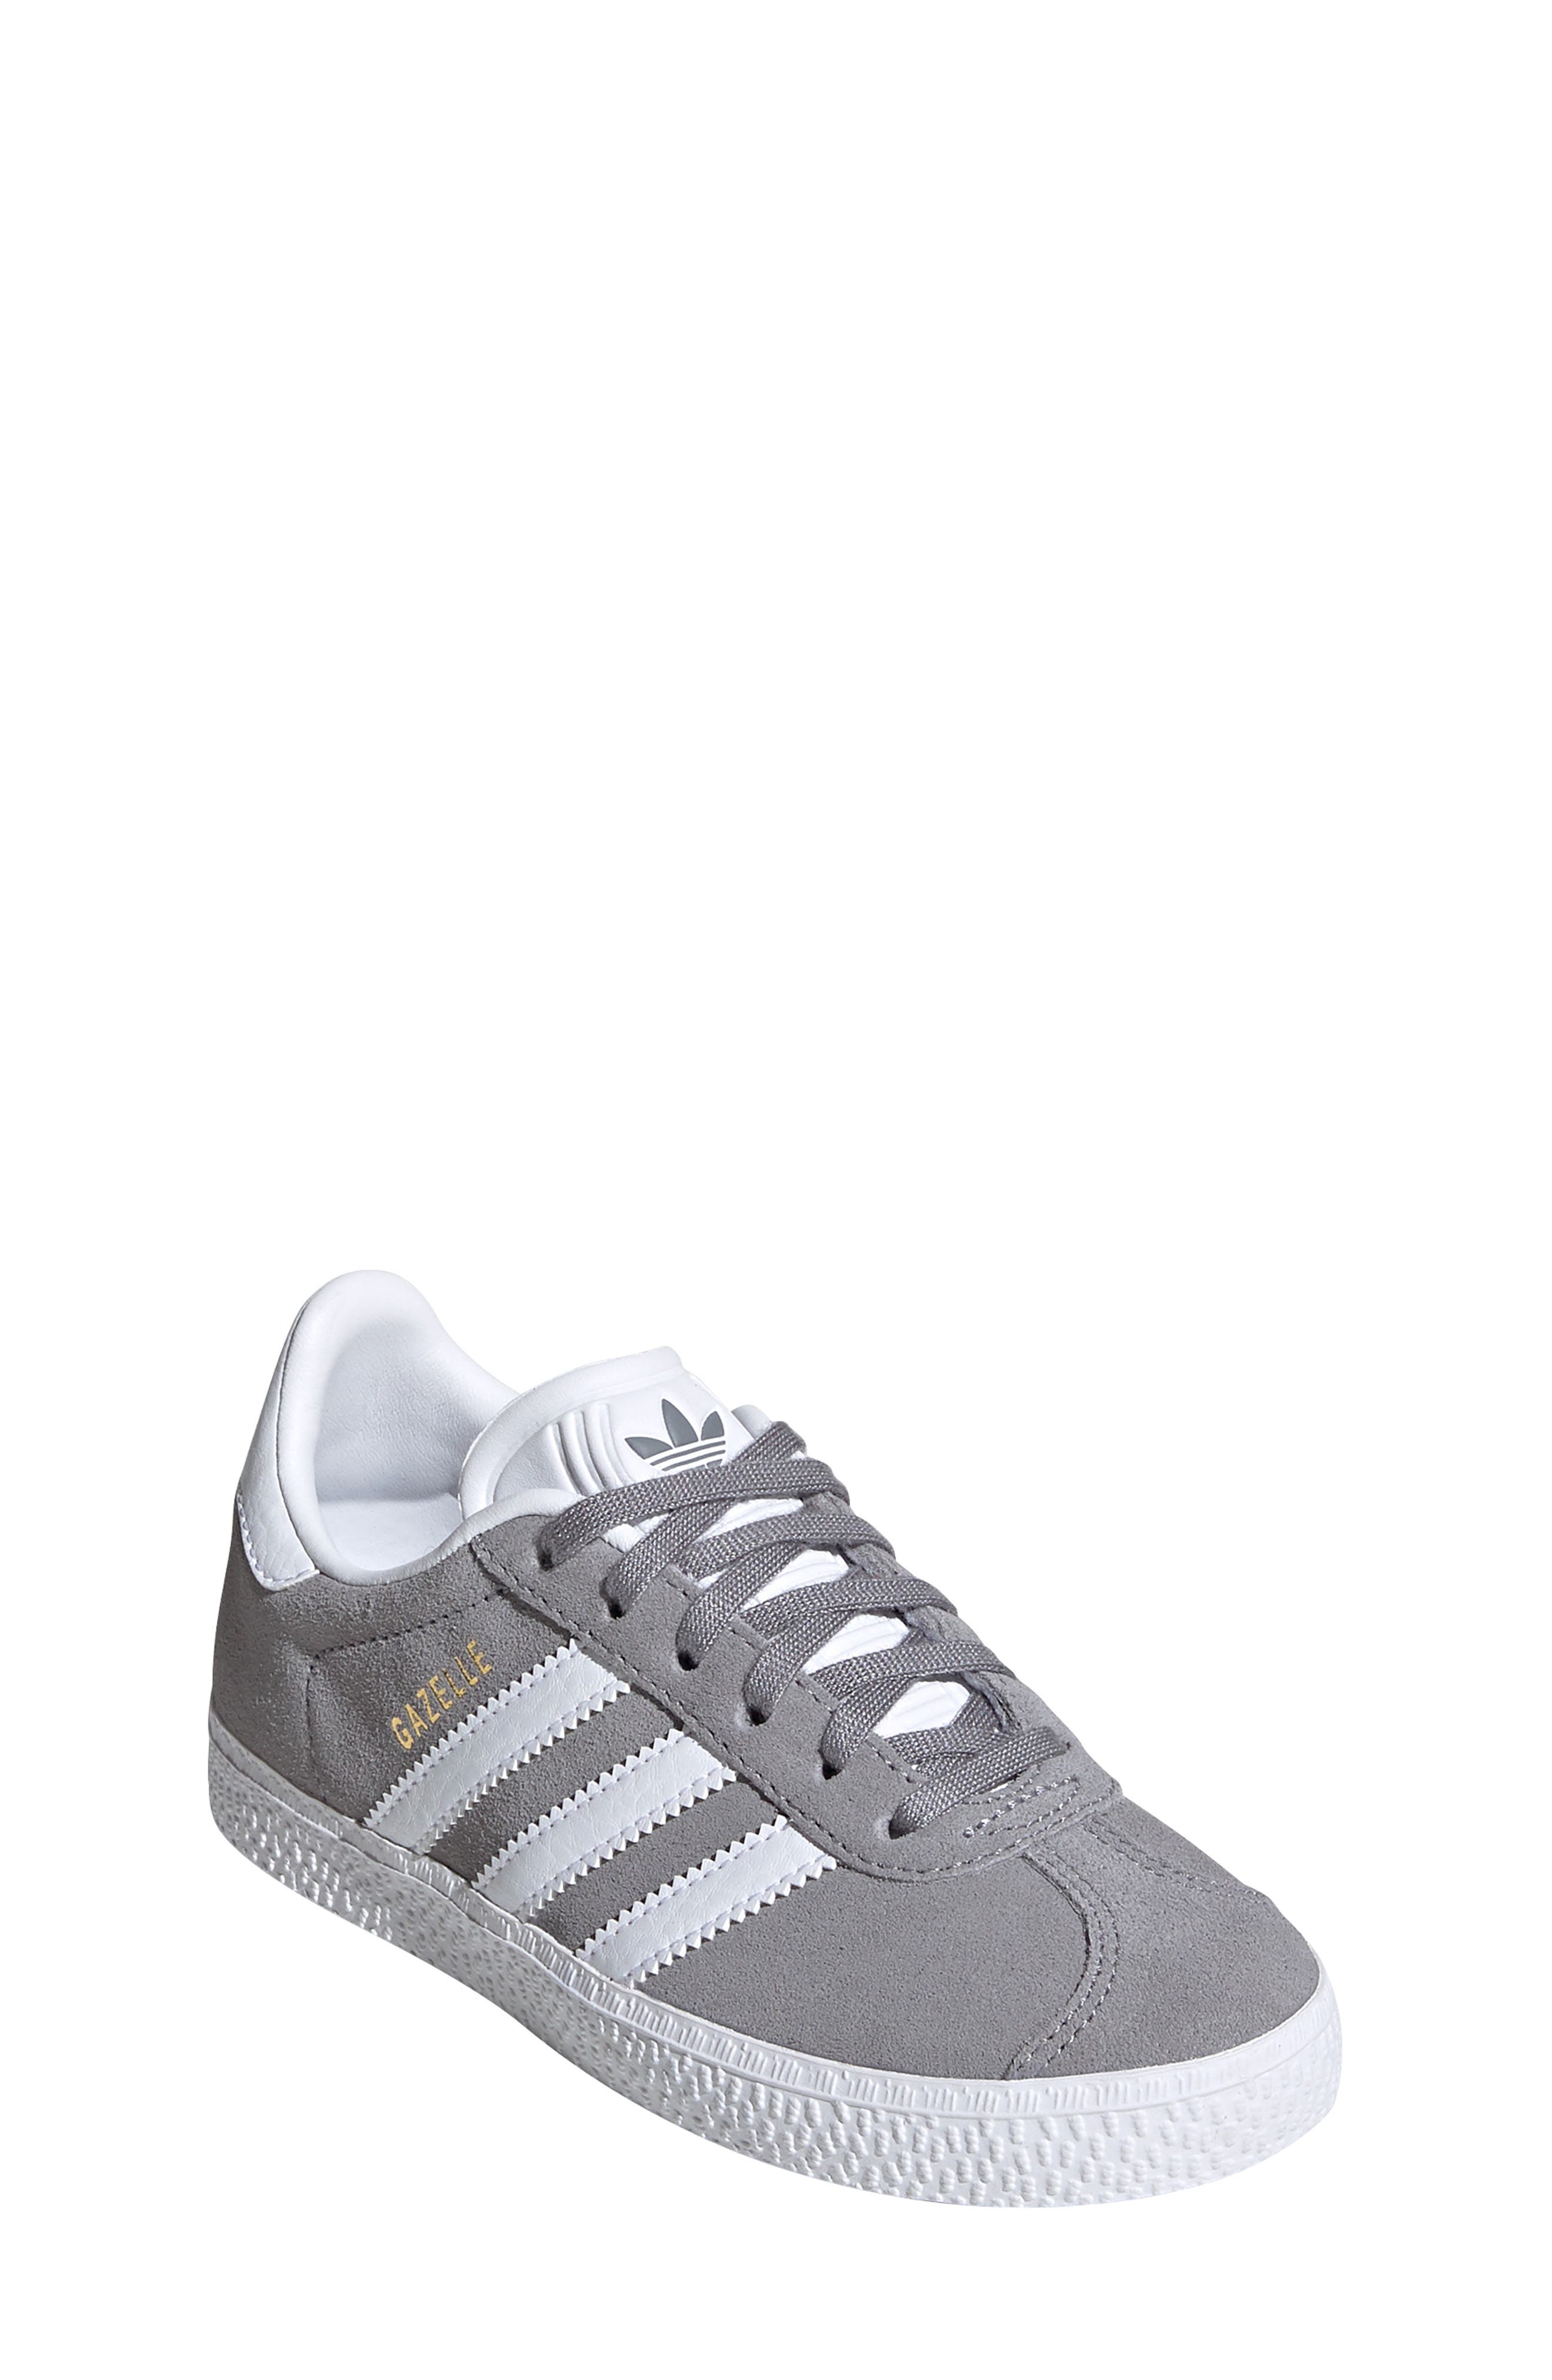 adidas sneakers for girls